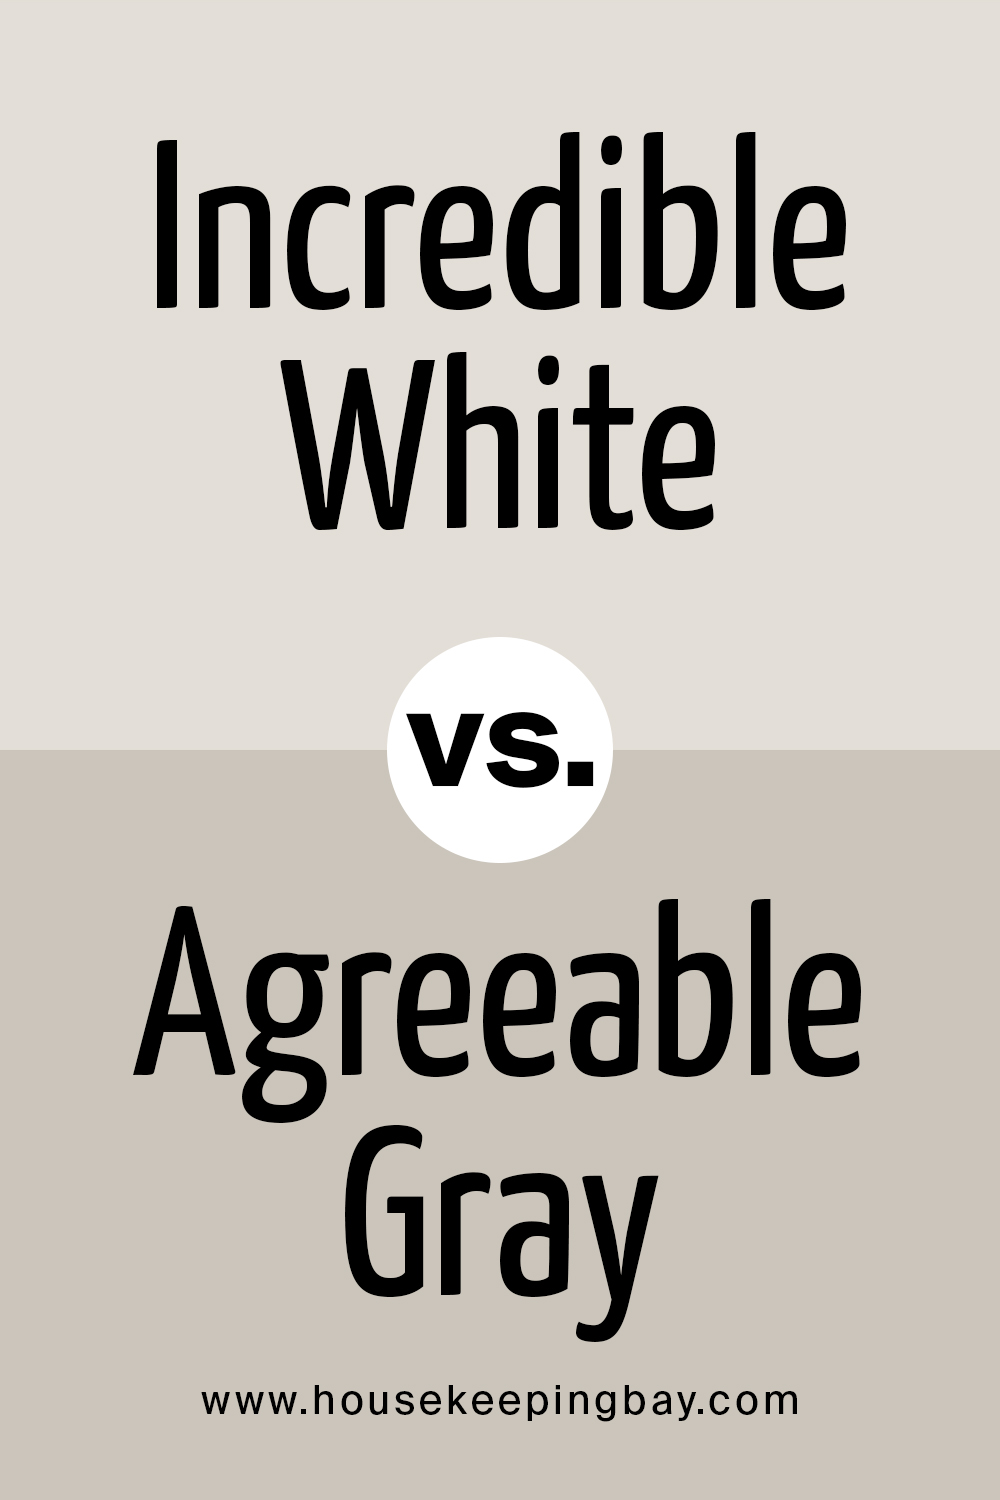 Incredible White vs Agreeable Gray